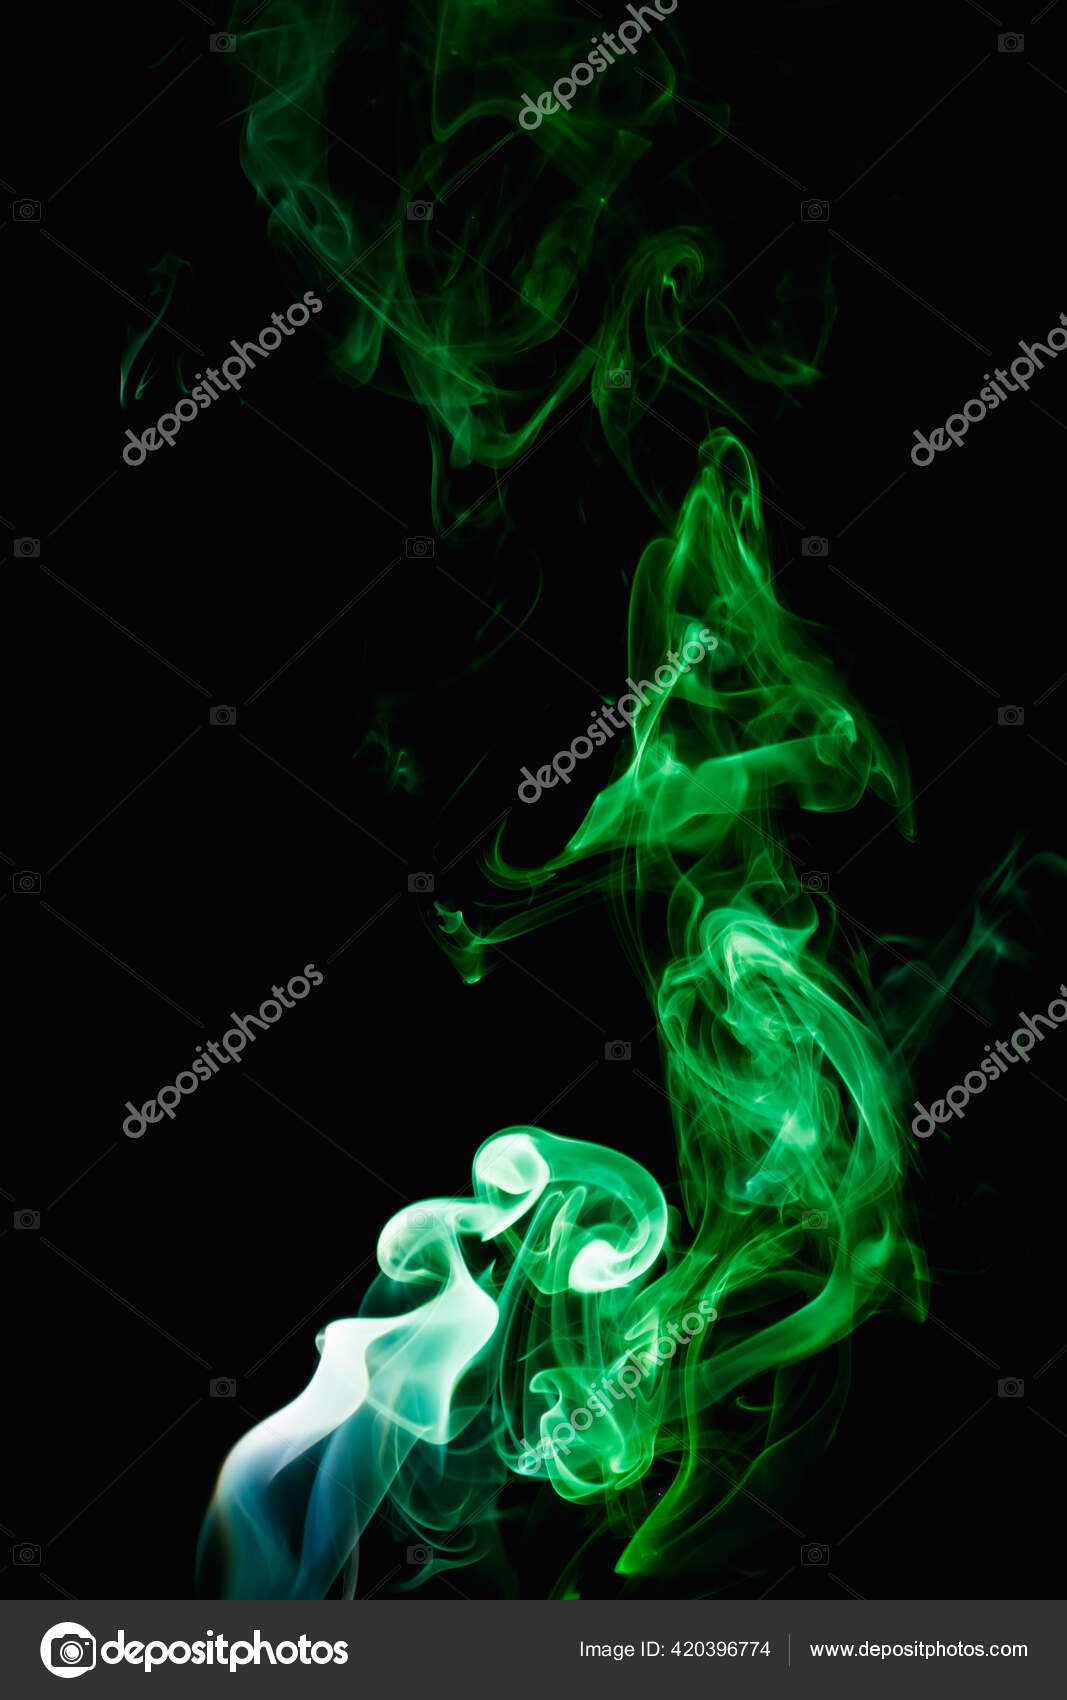 Green flare Stock Photos, Royalty Free Green flare Images